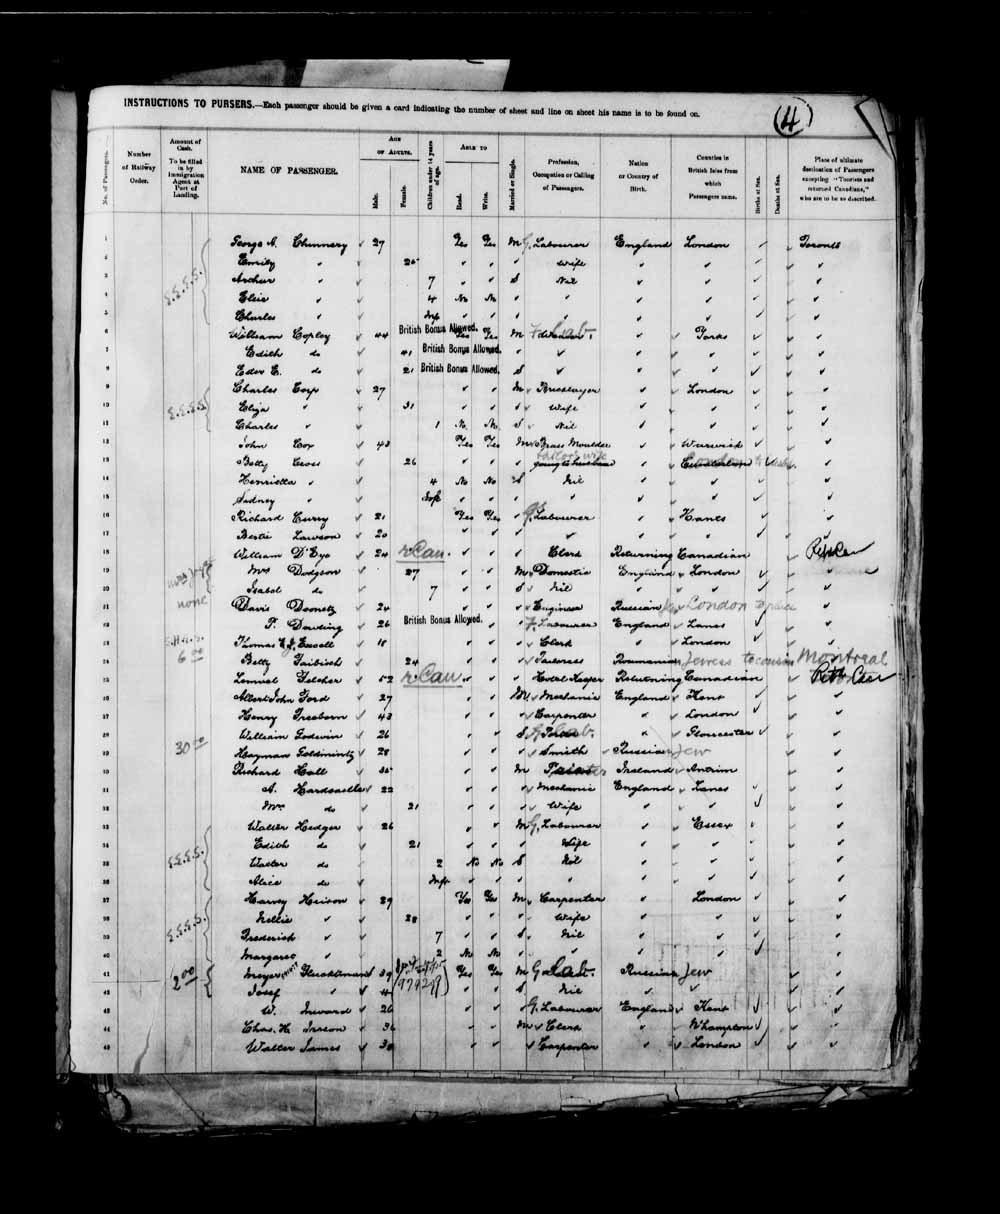 Digitized page of Passenger Lists for Image No.: e003658074